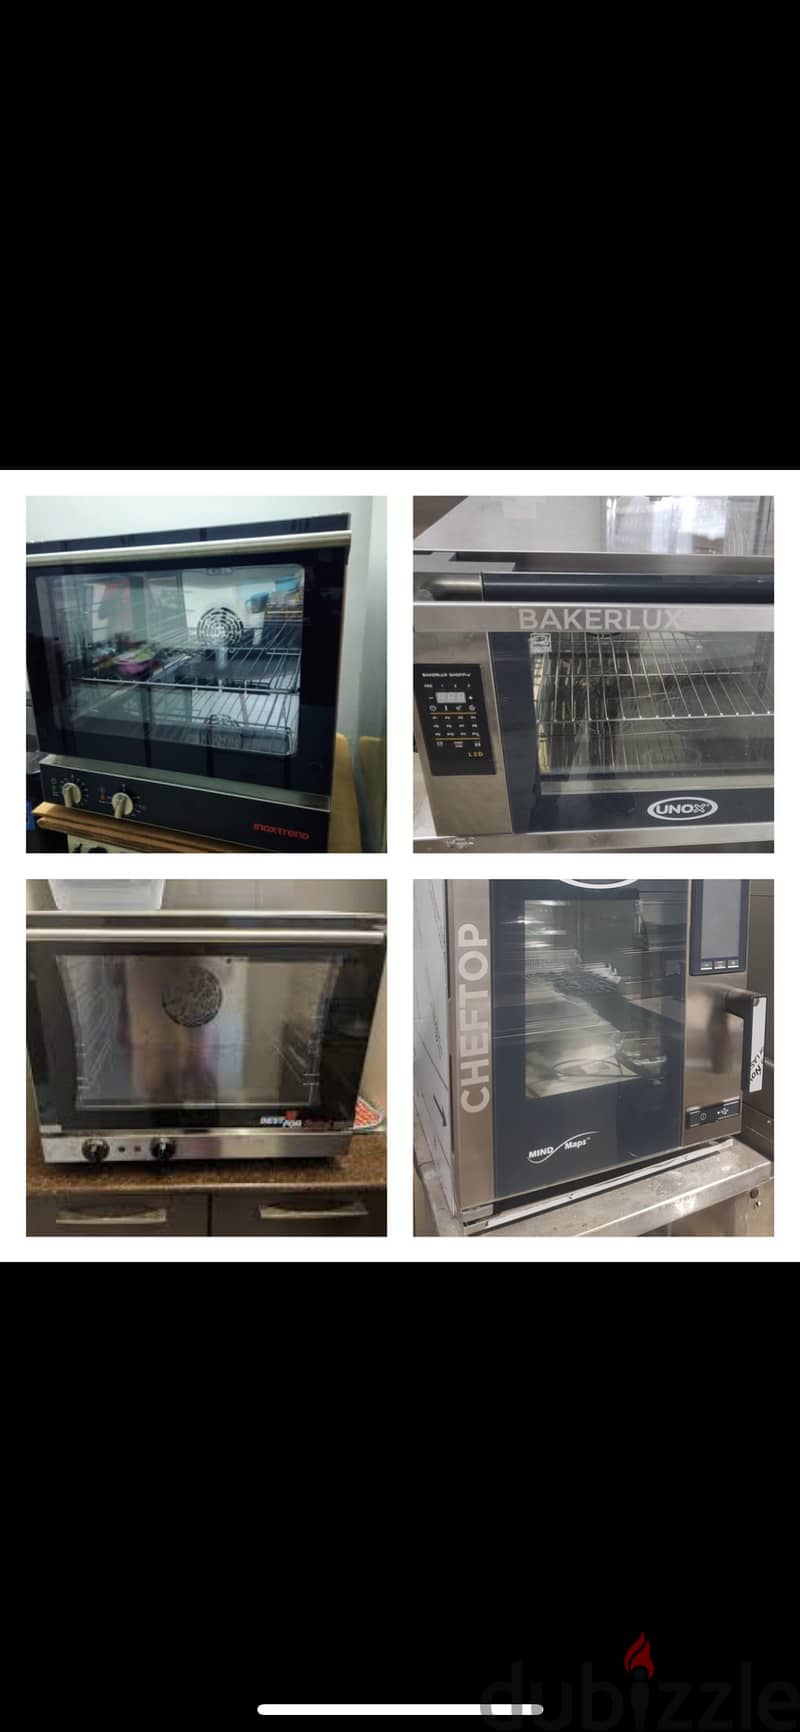 Restaurant and bakery equipments 0